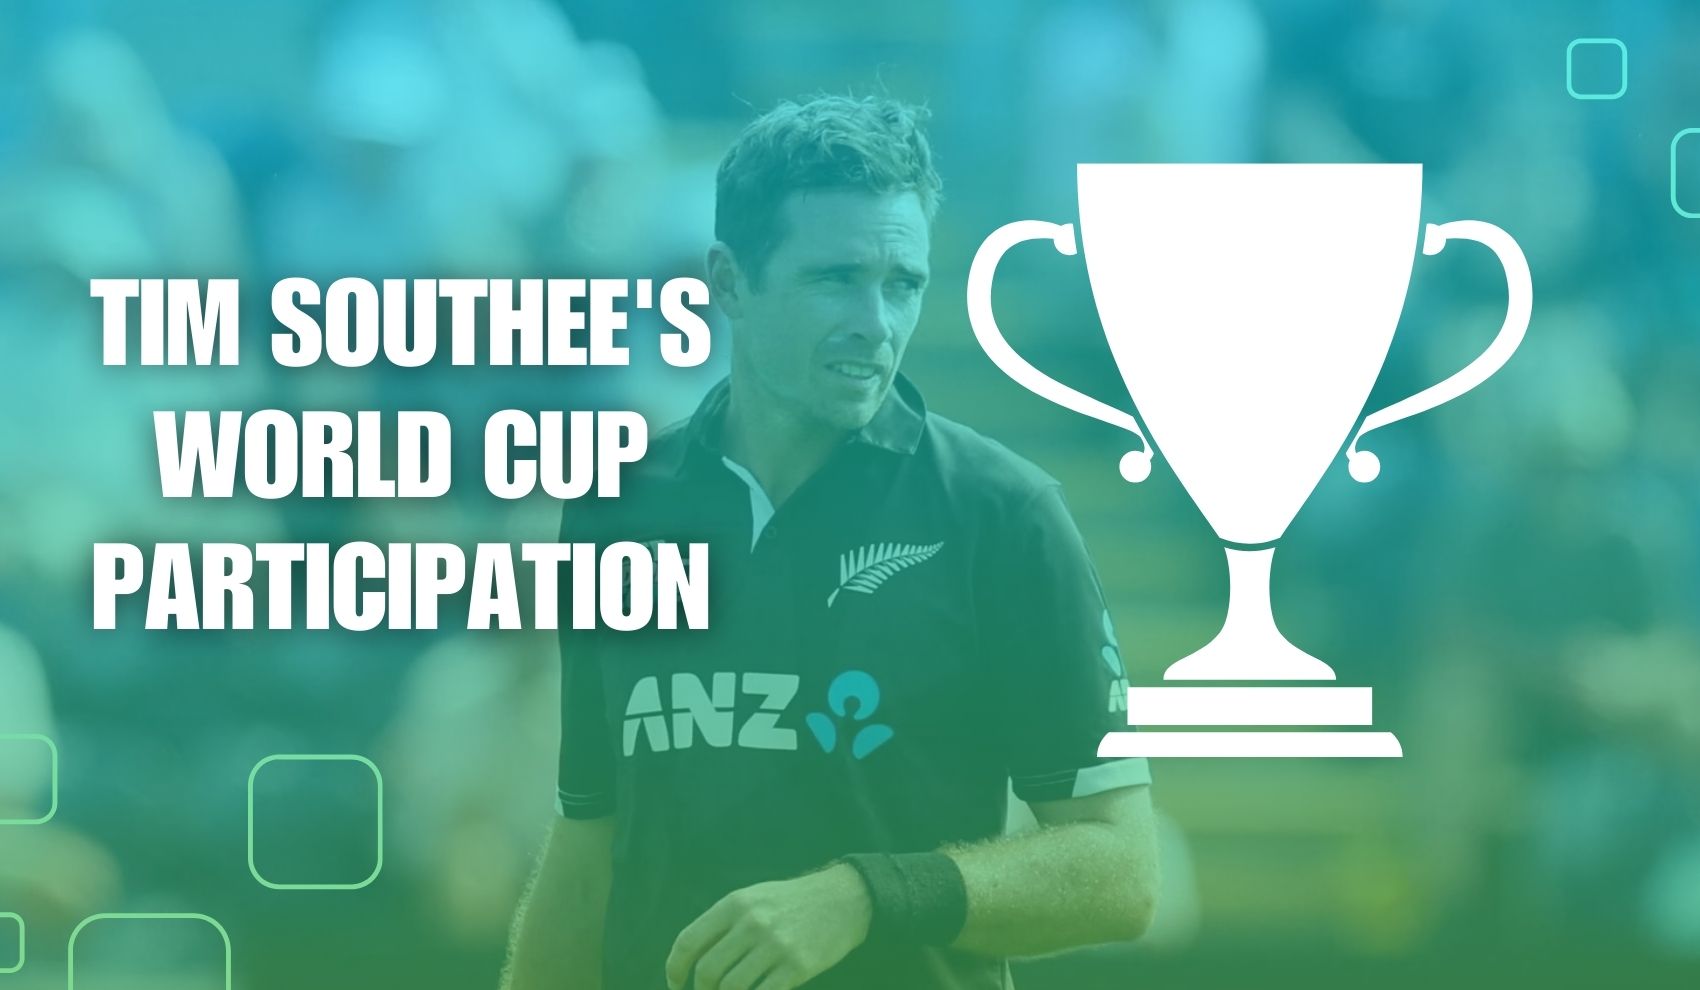 The Southee's World Cup participation news in India